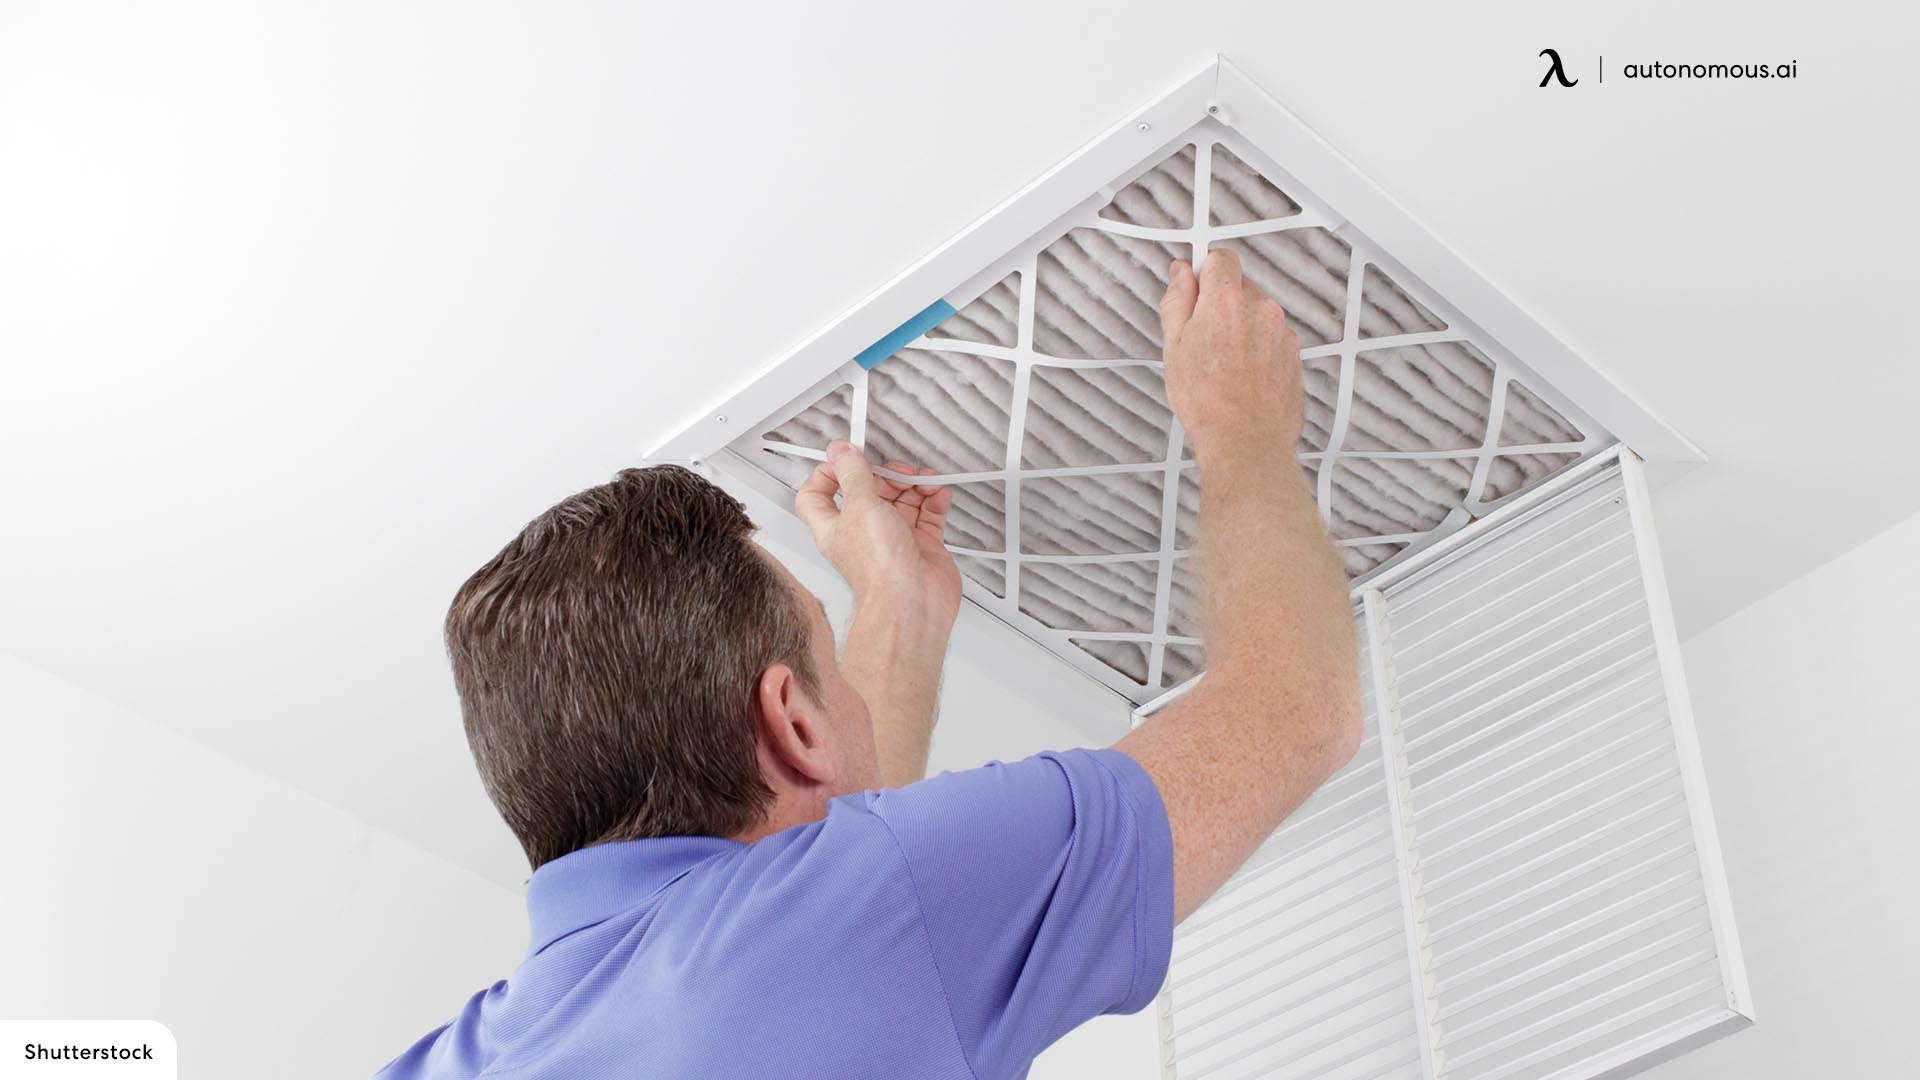 What Steps Can I Take to Control indoor airborne allergens?